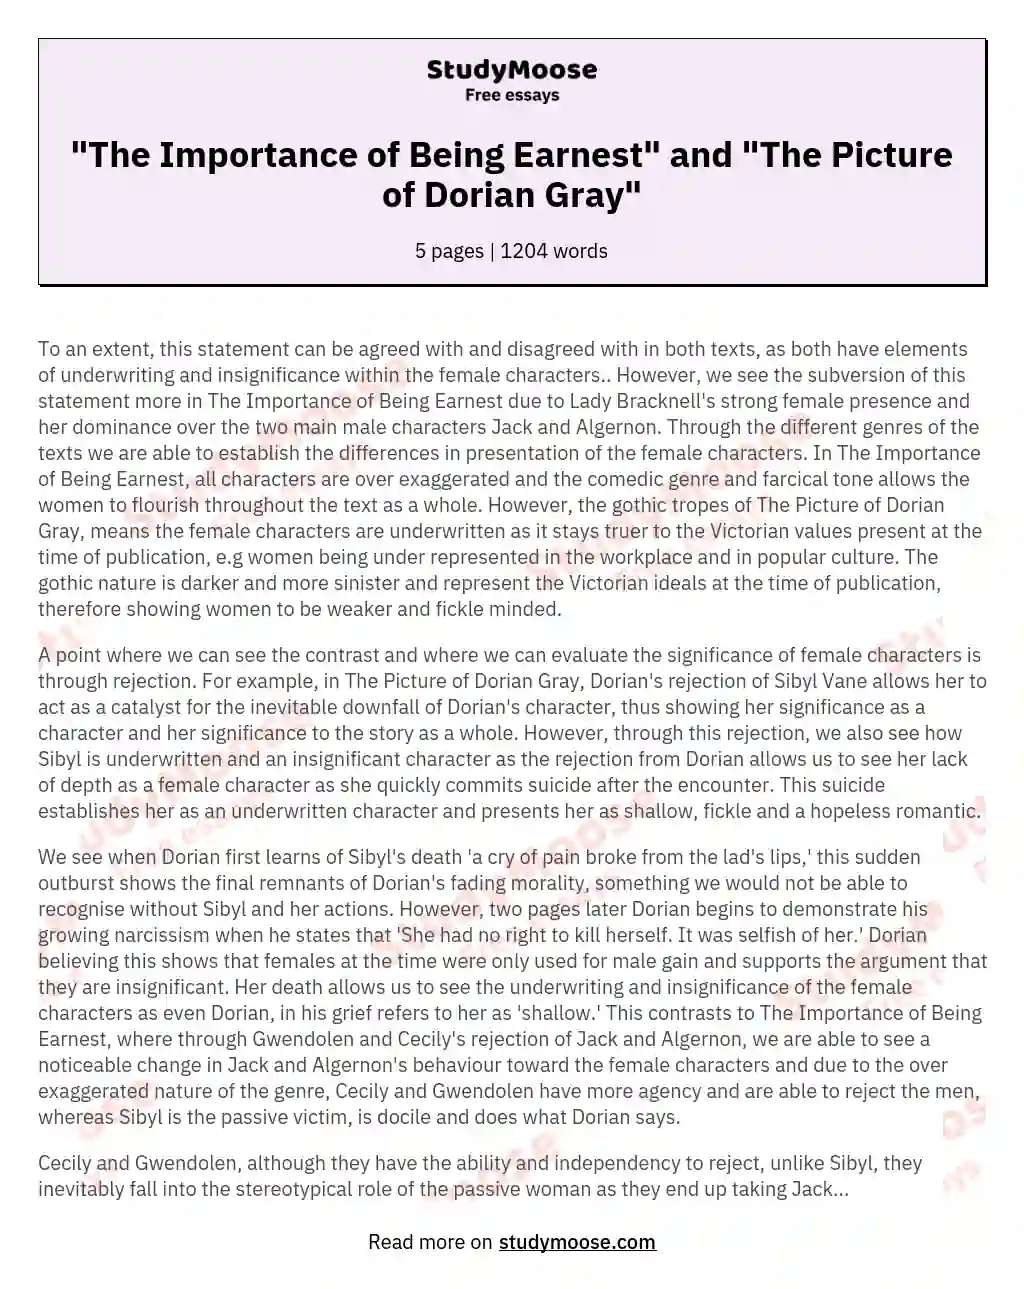 "The Importance of Being Earnest" and "The Picture of Dorian Gray" essay